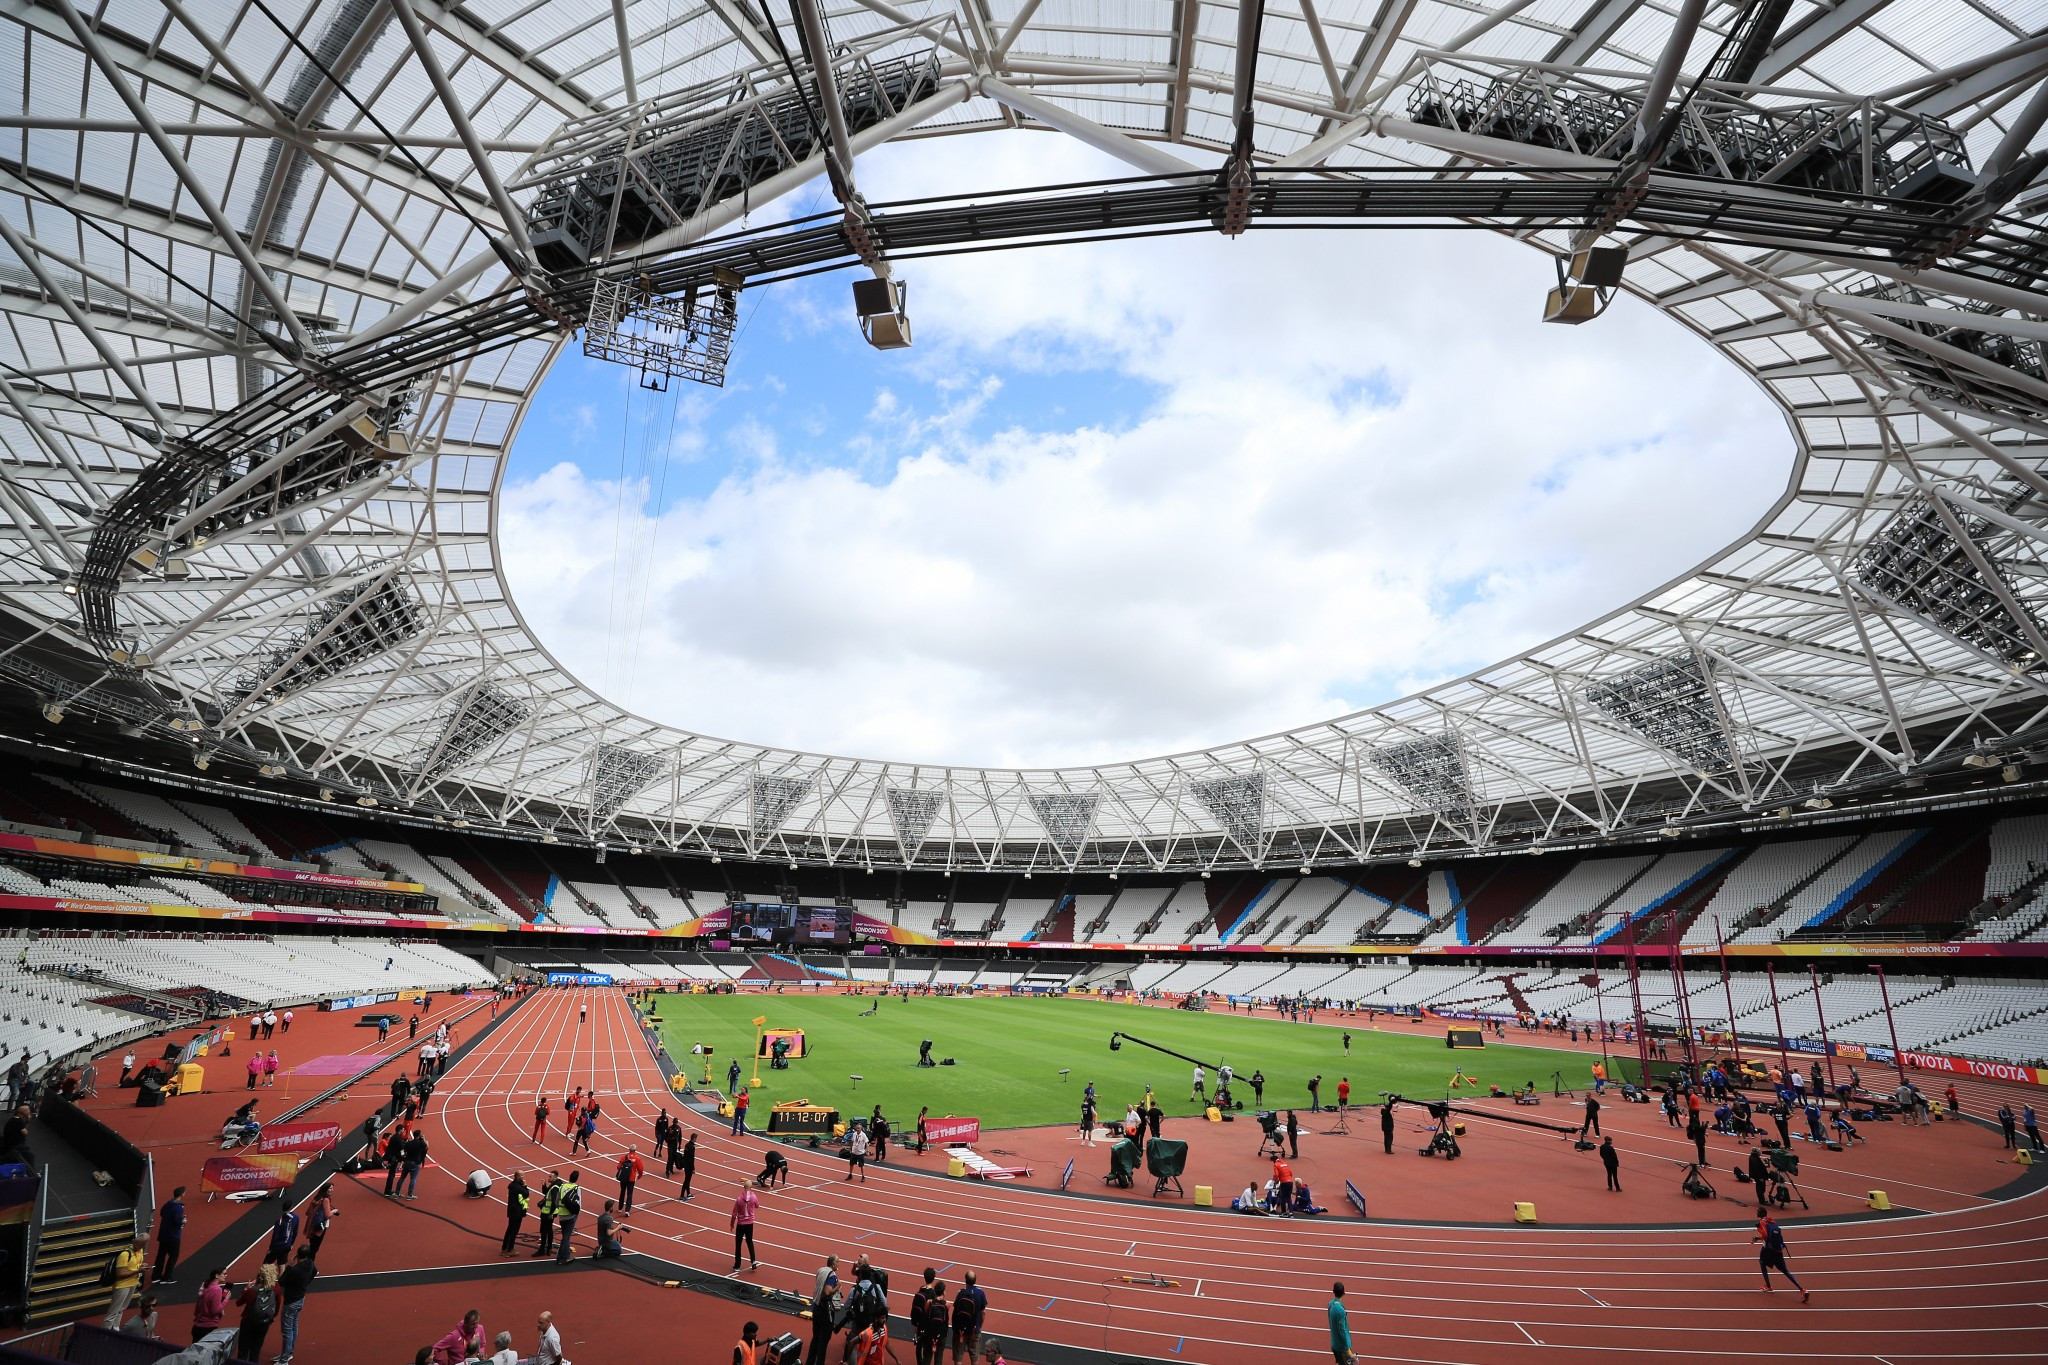 The finishing touches were being made to the Olympic Stadium today prior to the start of competition tomorrow ©Getty Images